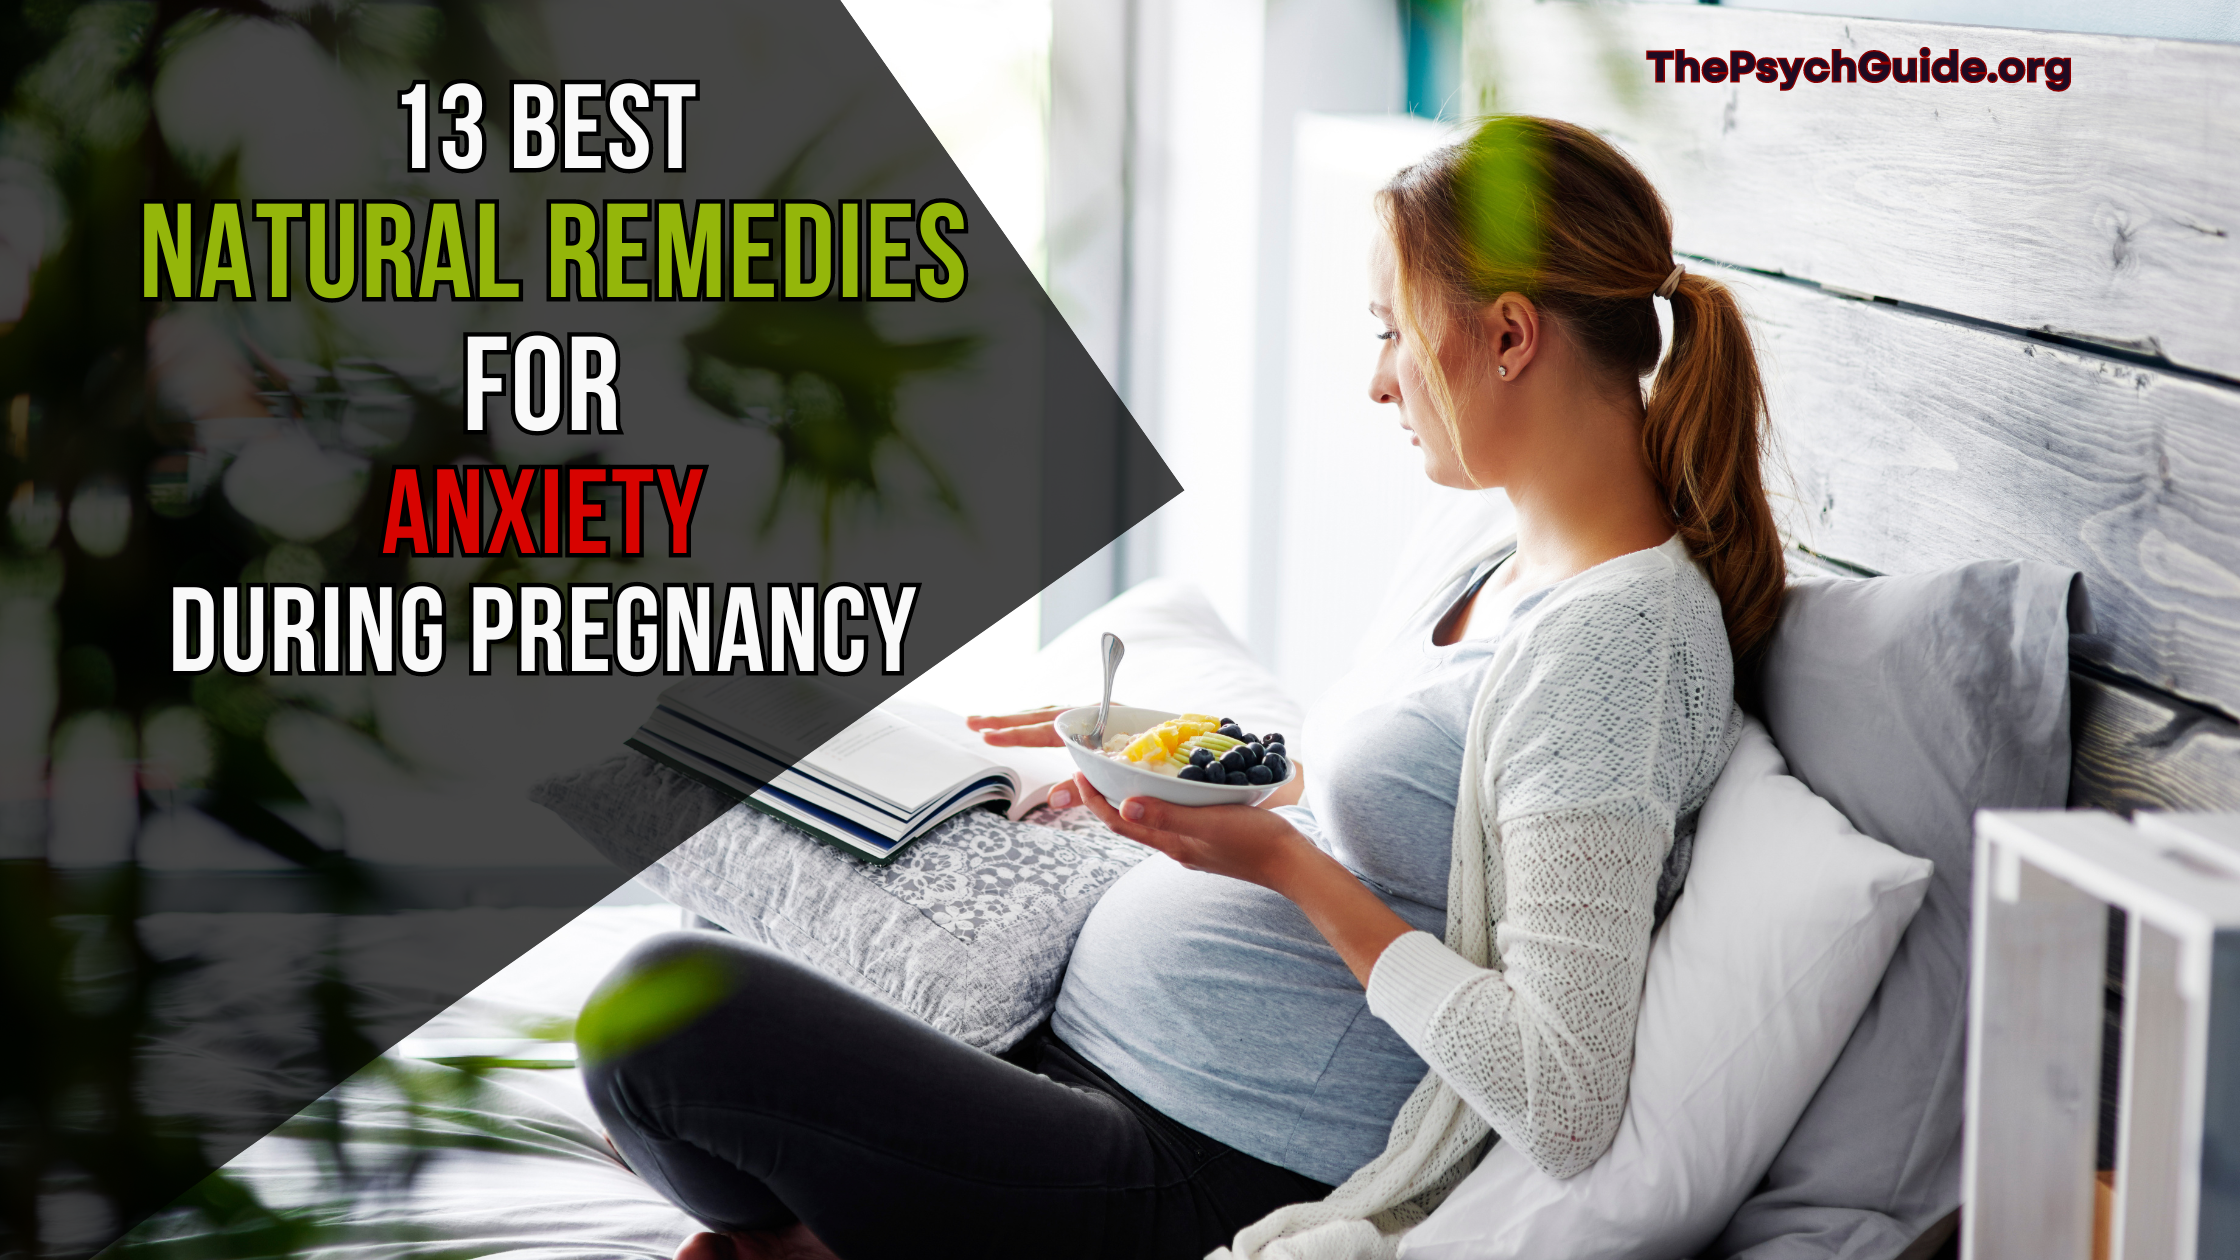 13 best natural remedies for anxiety during pregnancy